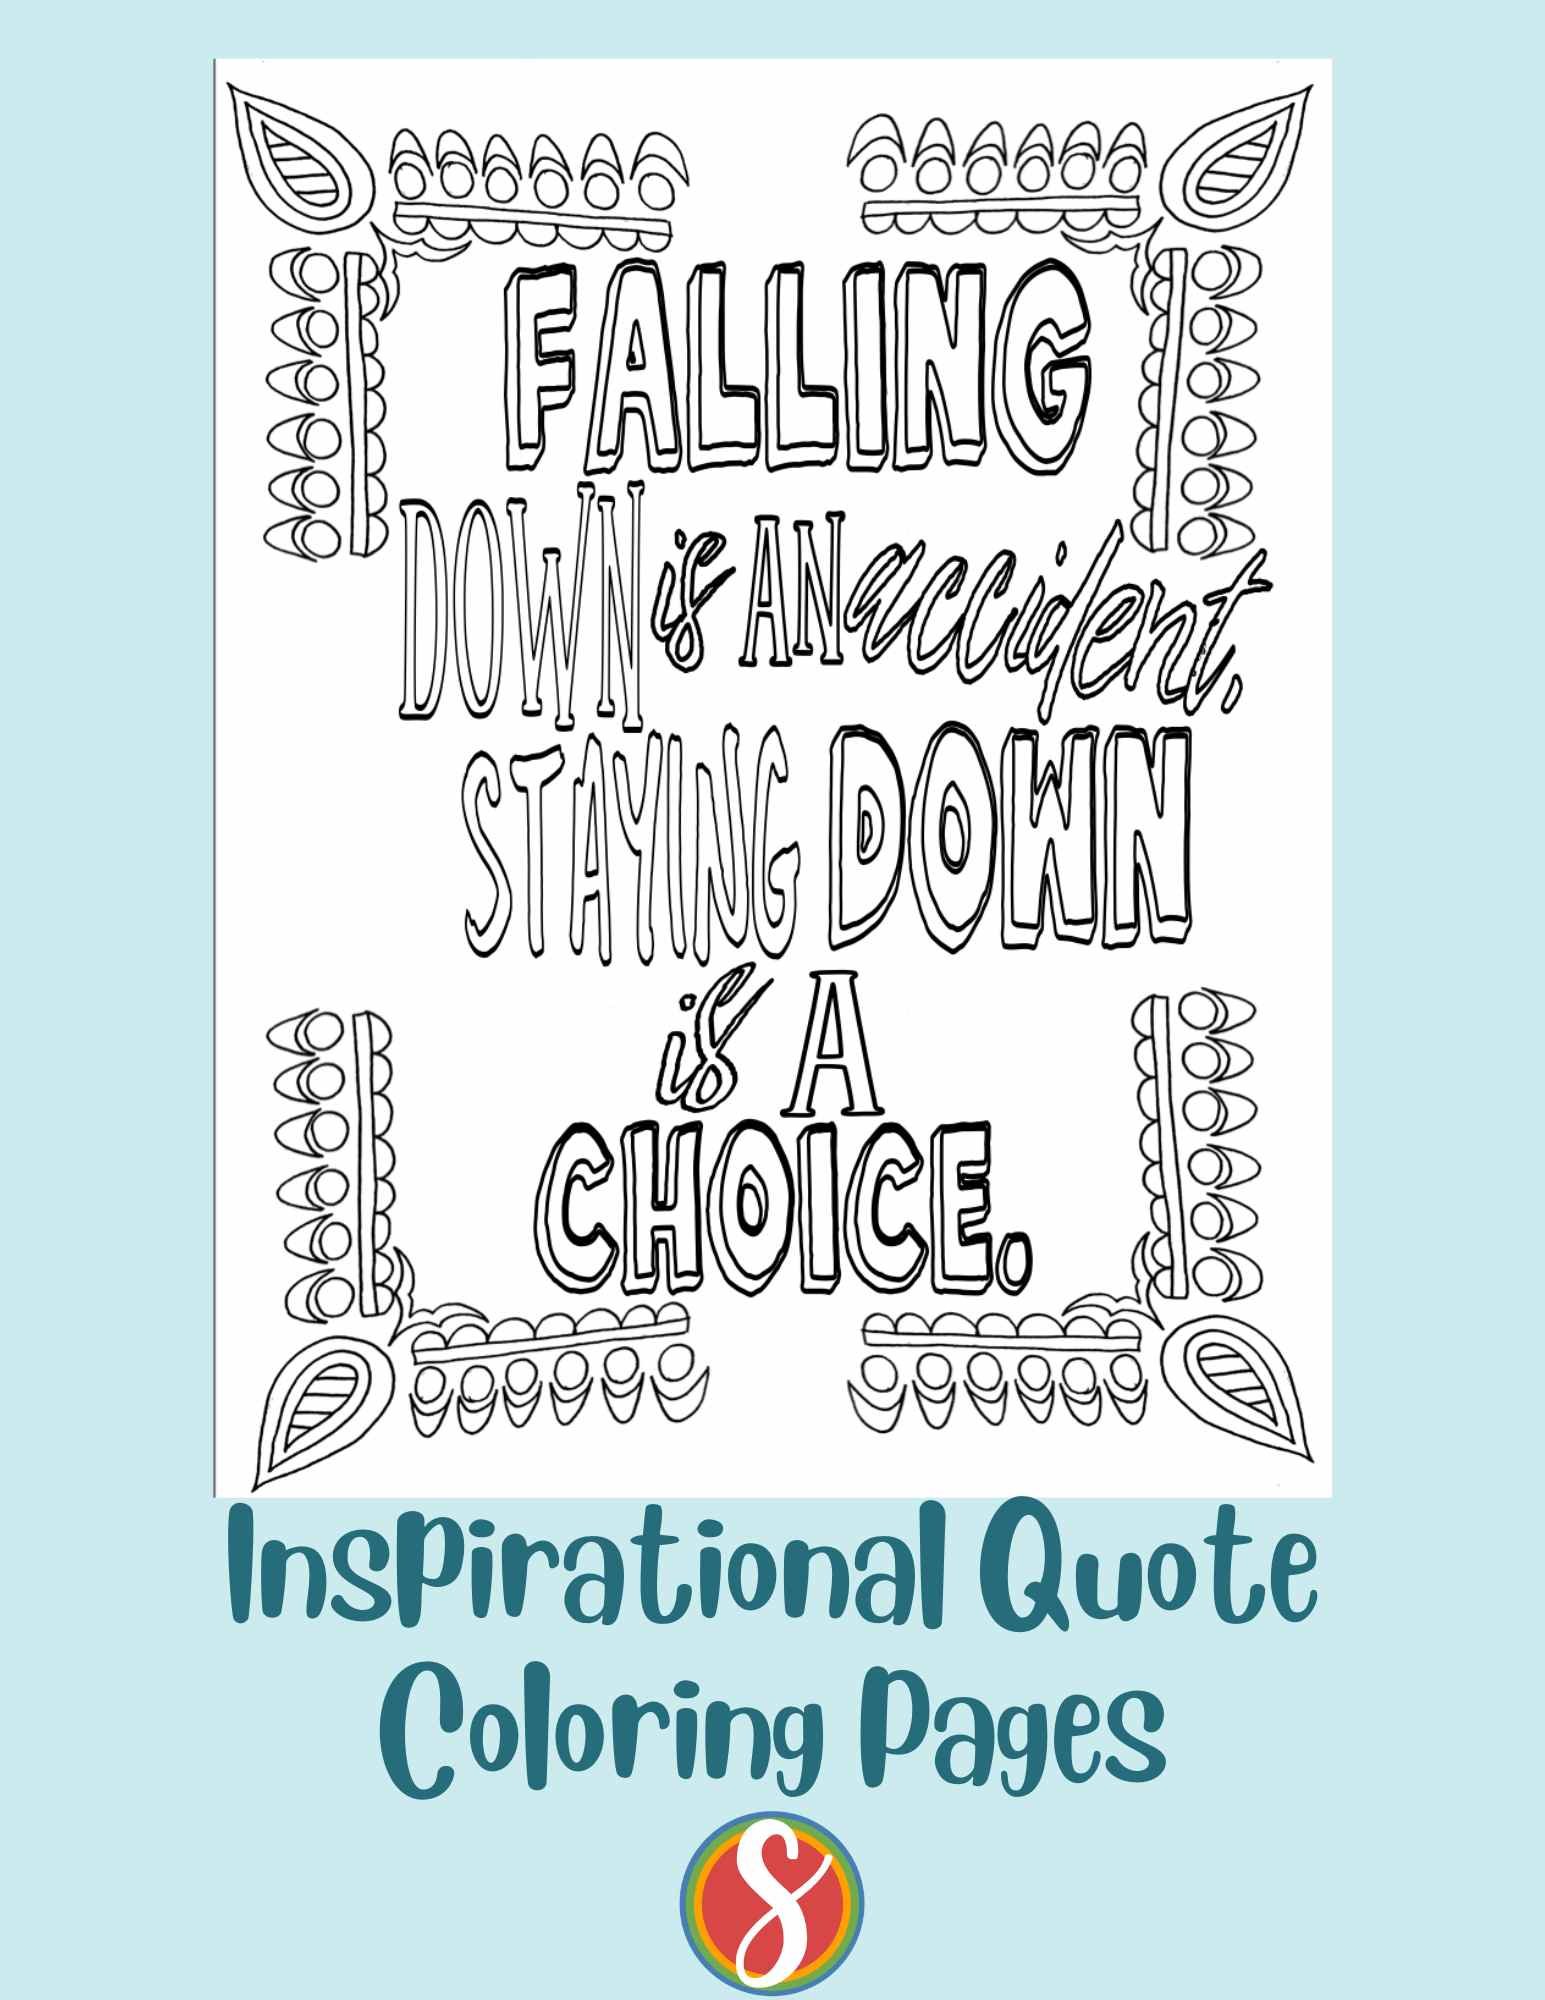 four corners of colorable designs, colorable words centered "Facing down is an accident, staying down is a choice"